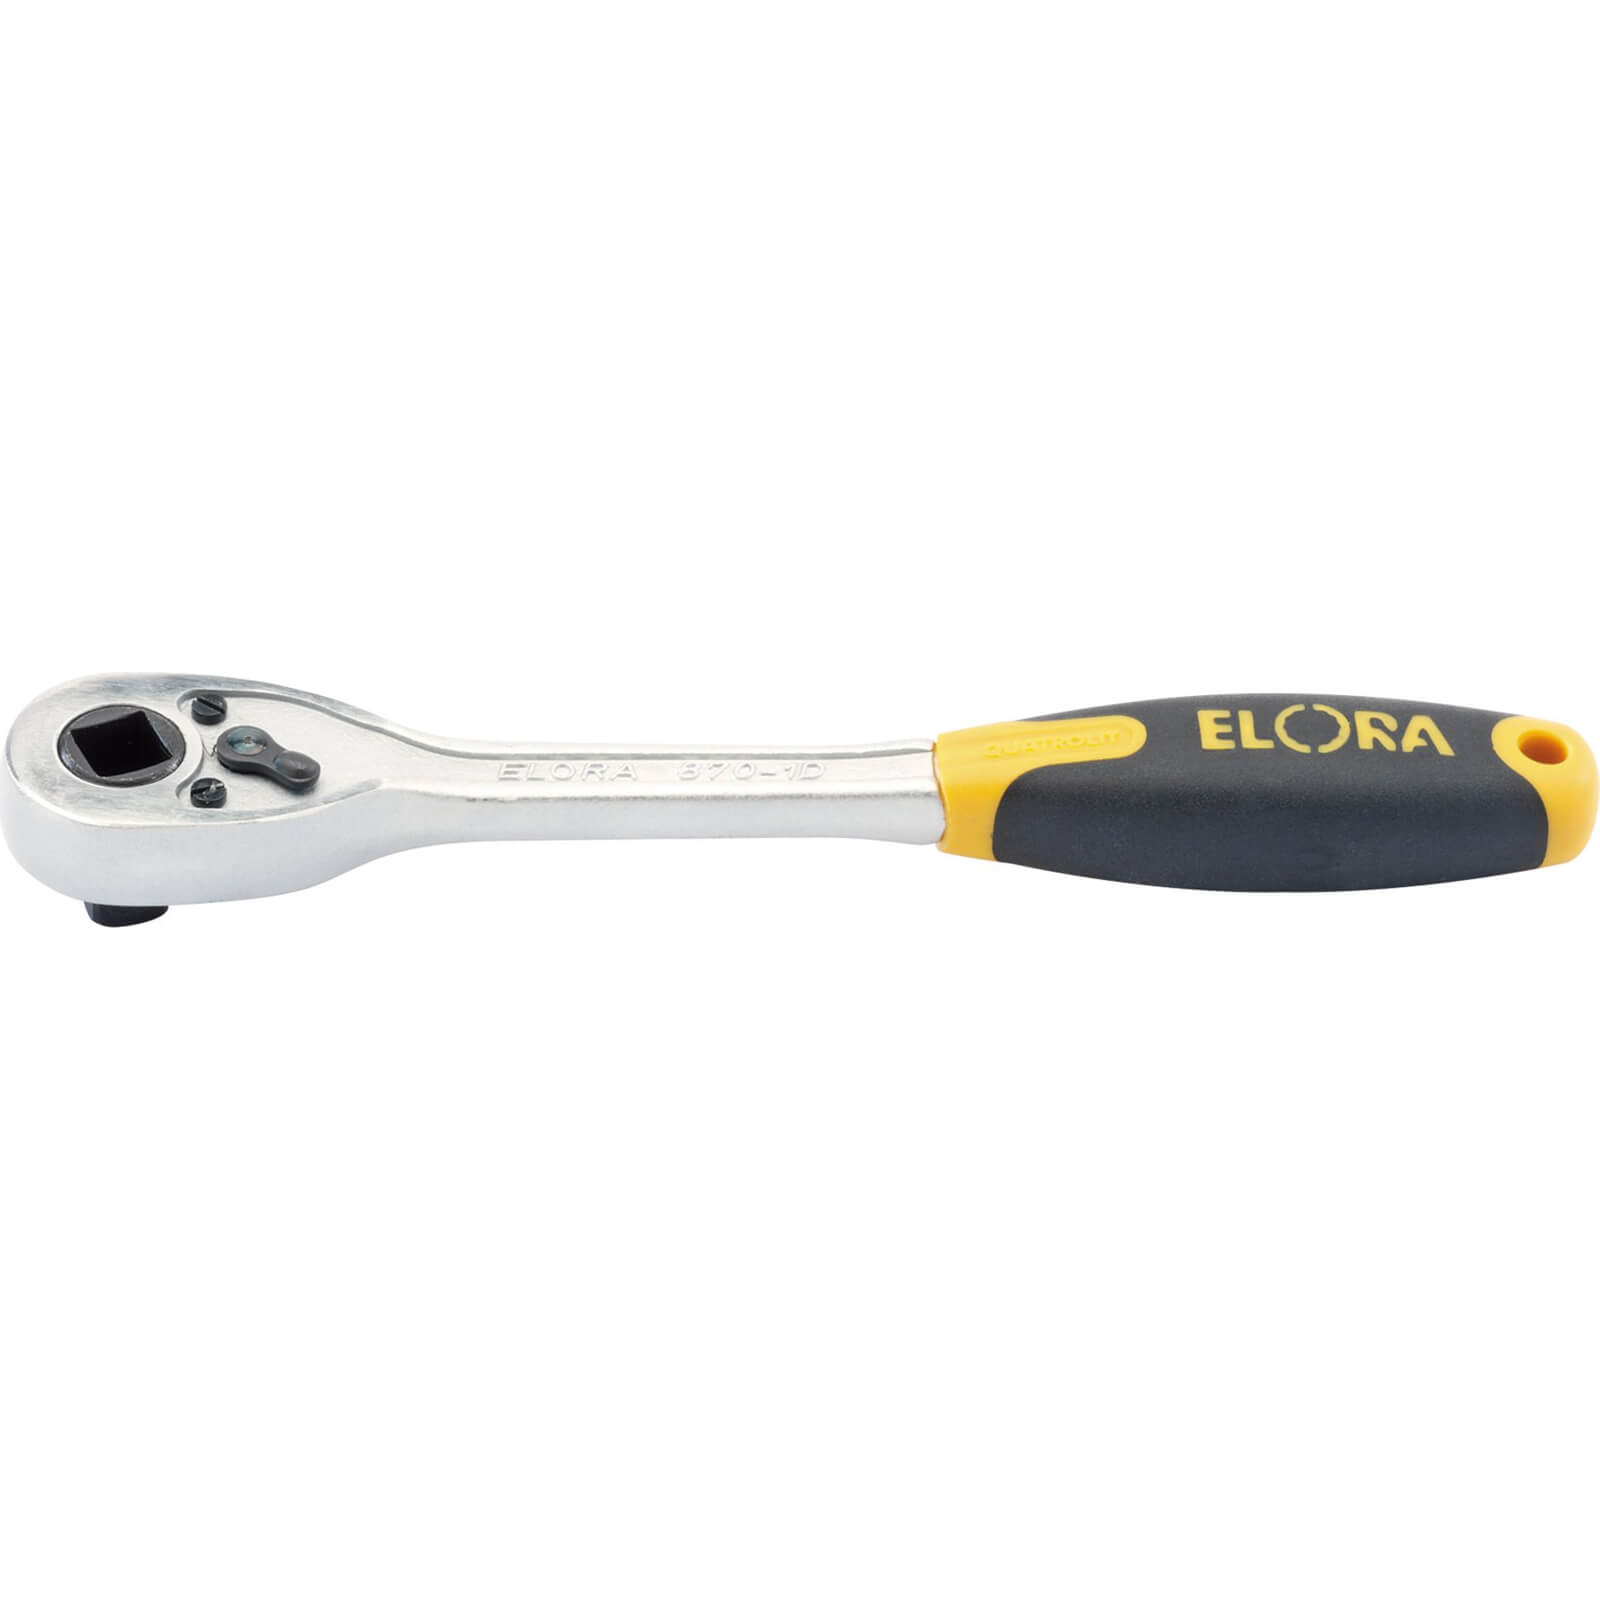 Image of Elora 3/8" Drive Ratchet with Male and Female Couplers 3/8"